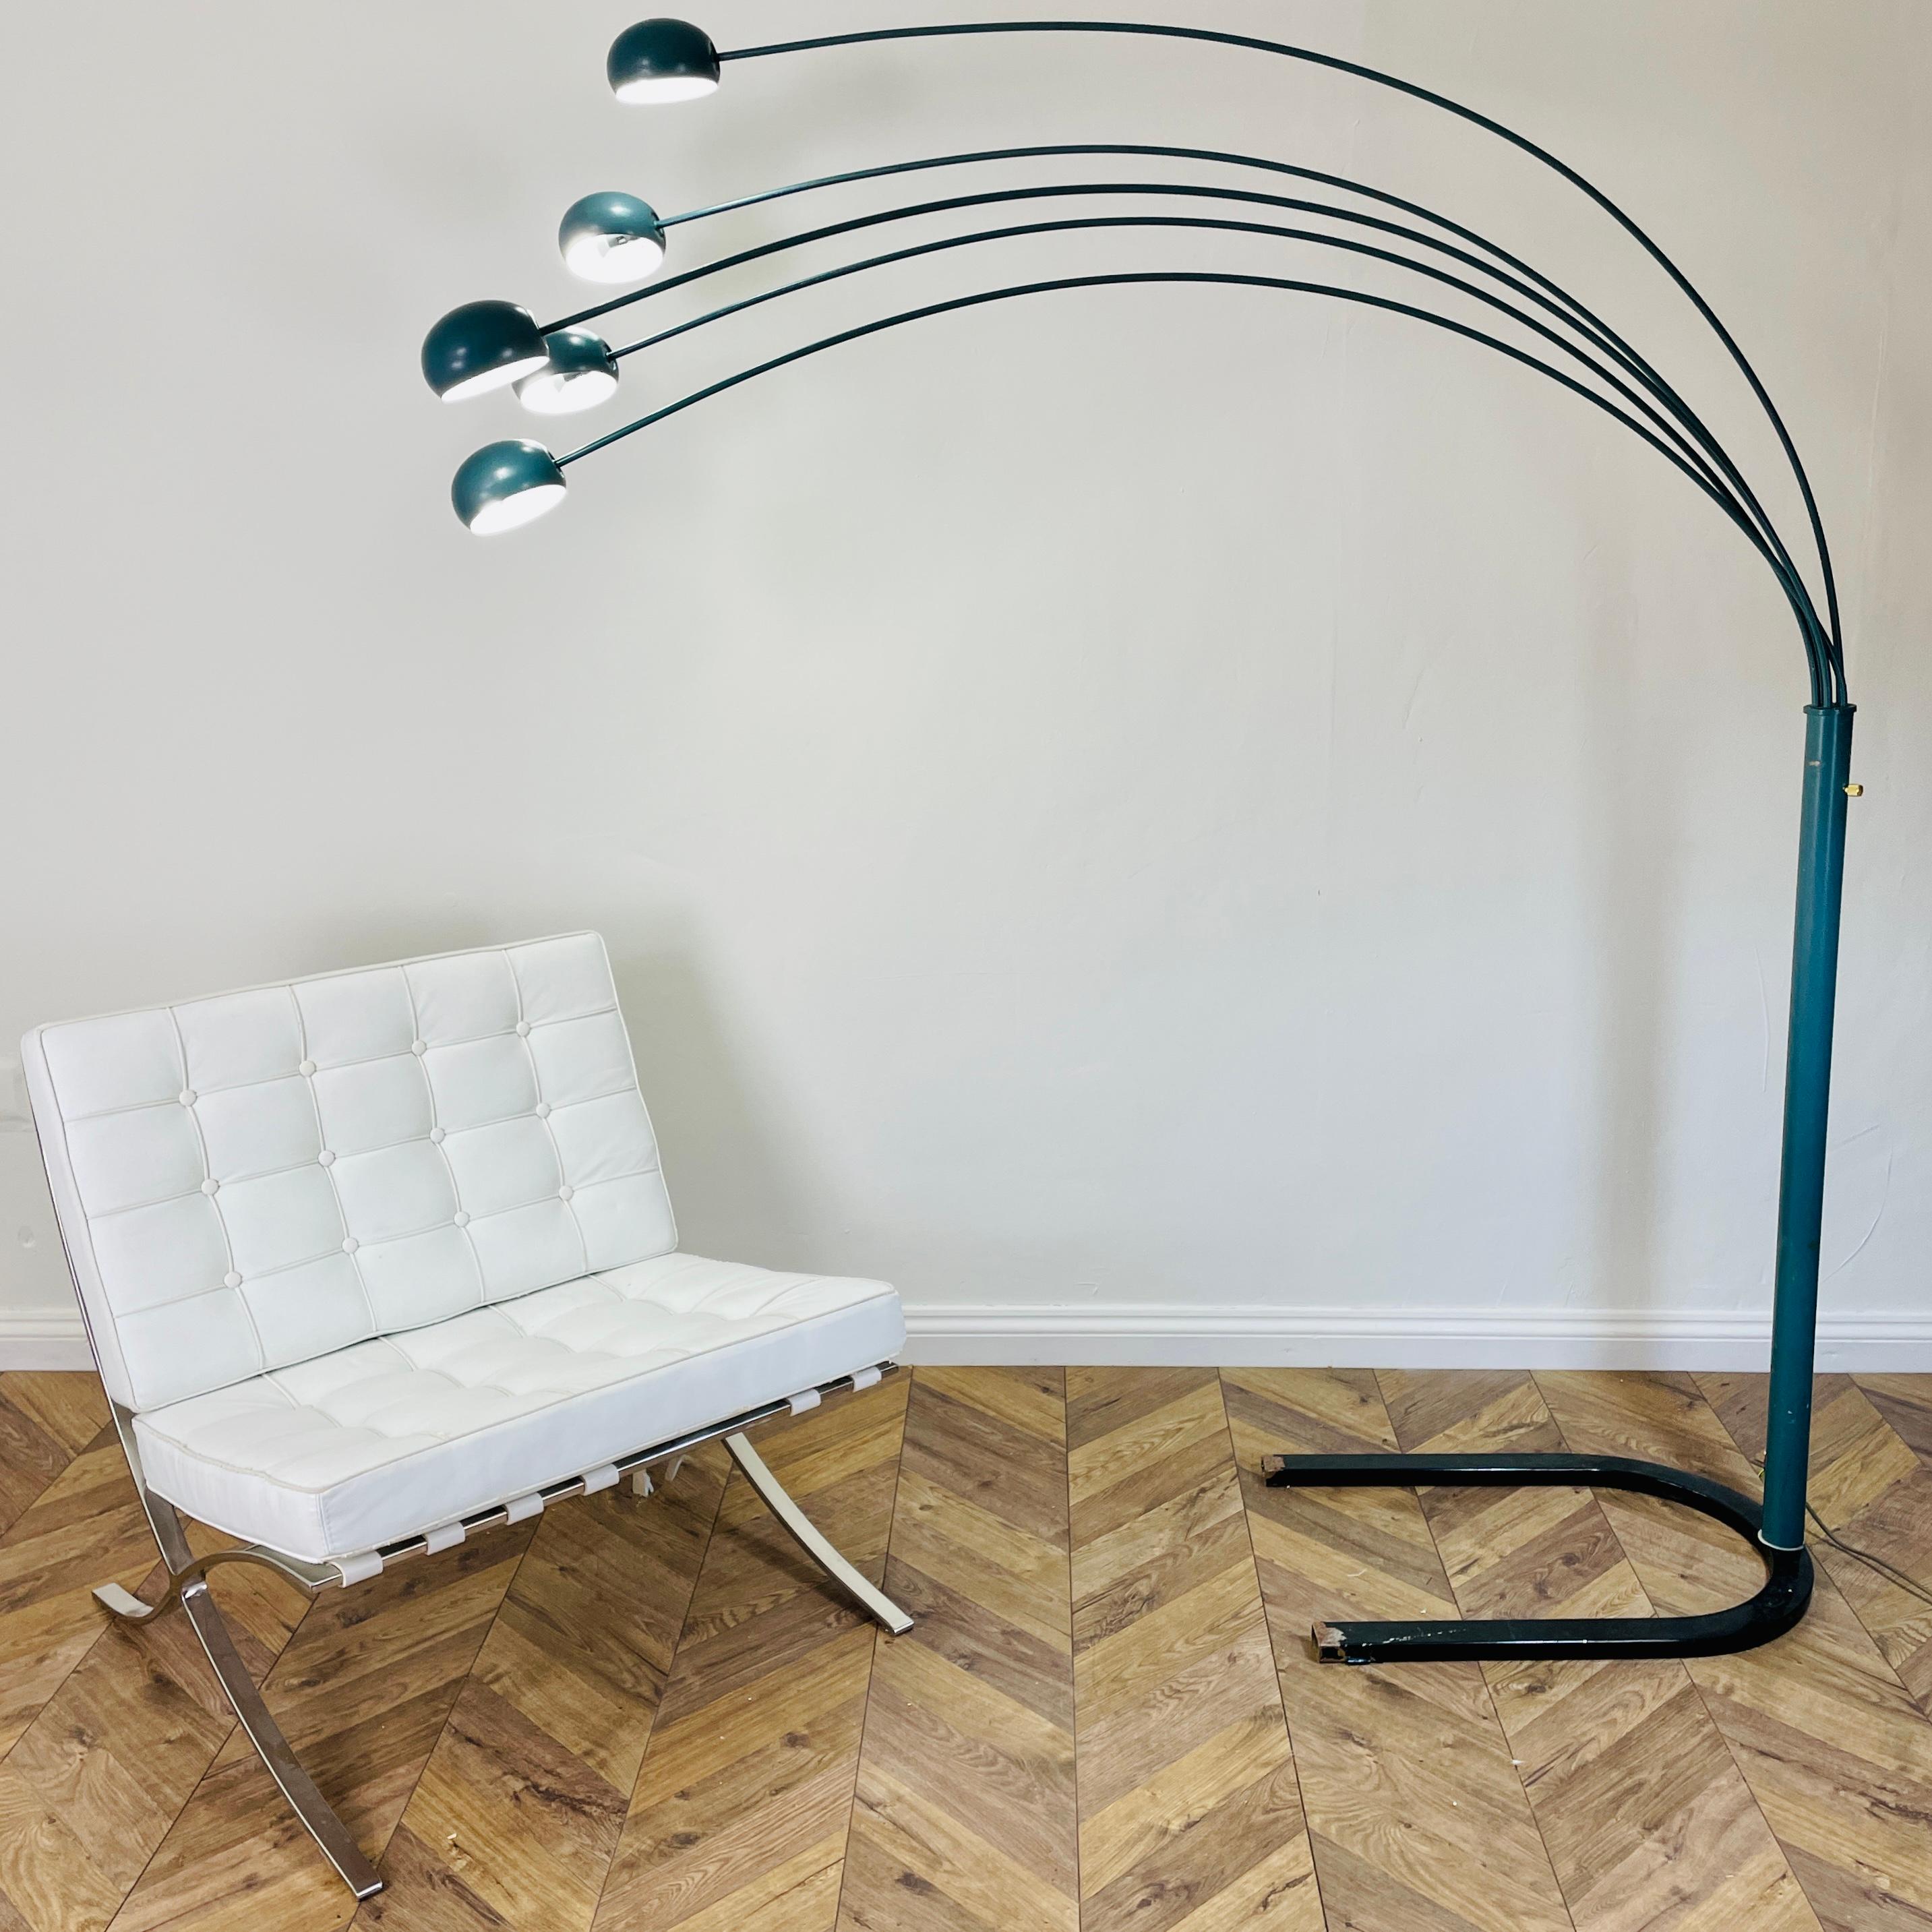 Super Mid Century, Large Floor Lamp, Attributed to Harvey Guzzini. c1970s.

The vintage Italian floor lamp features a black steel base (possibly changed from the original marble base) with 5 arc-shaped metal rods with dome shades, all teal